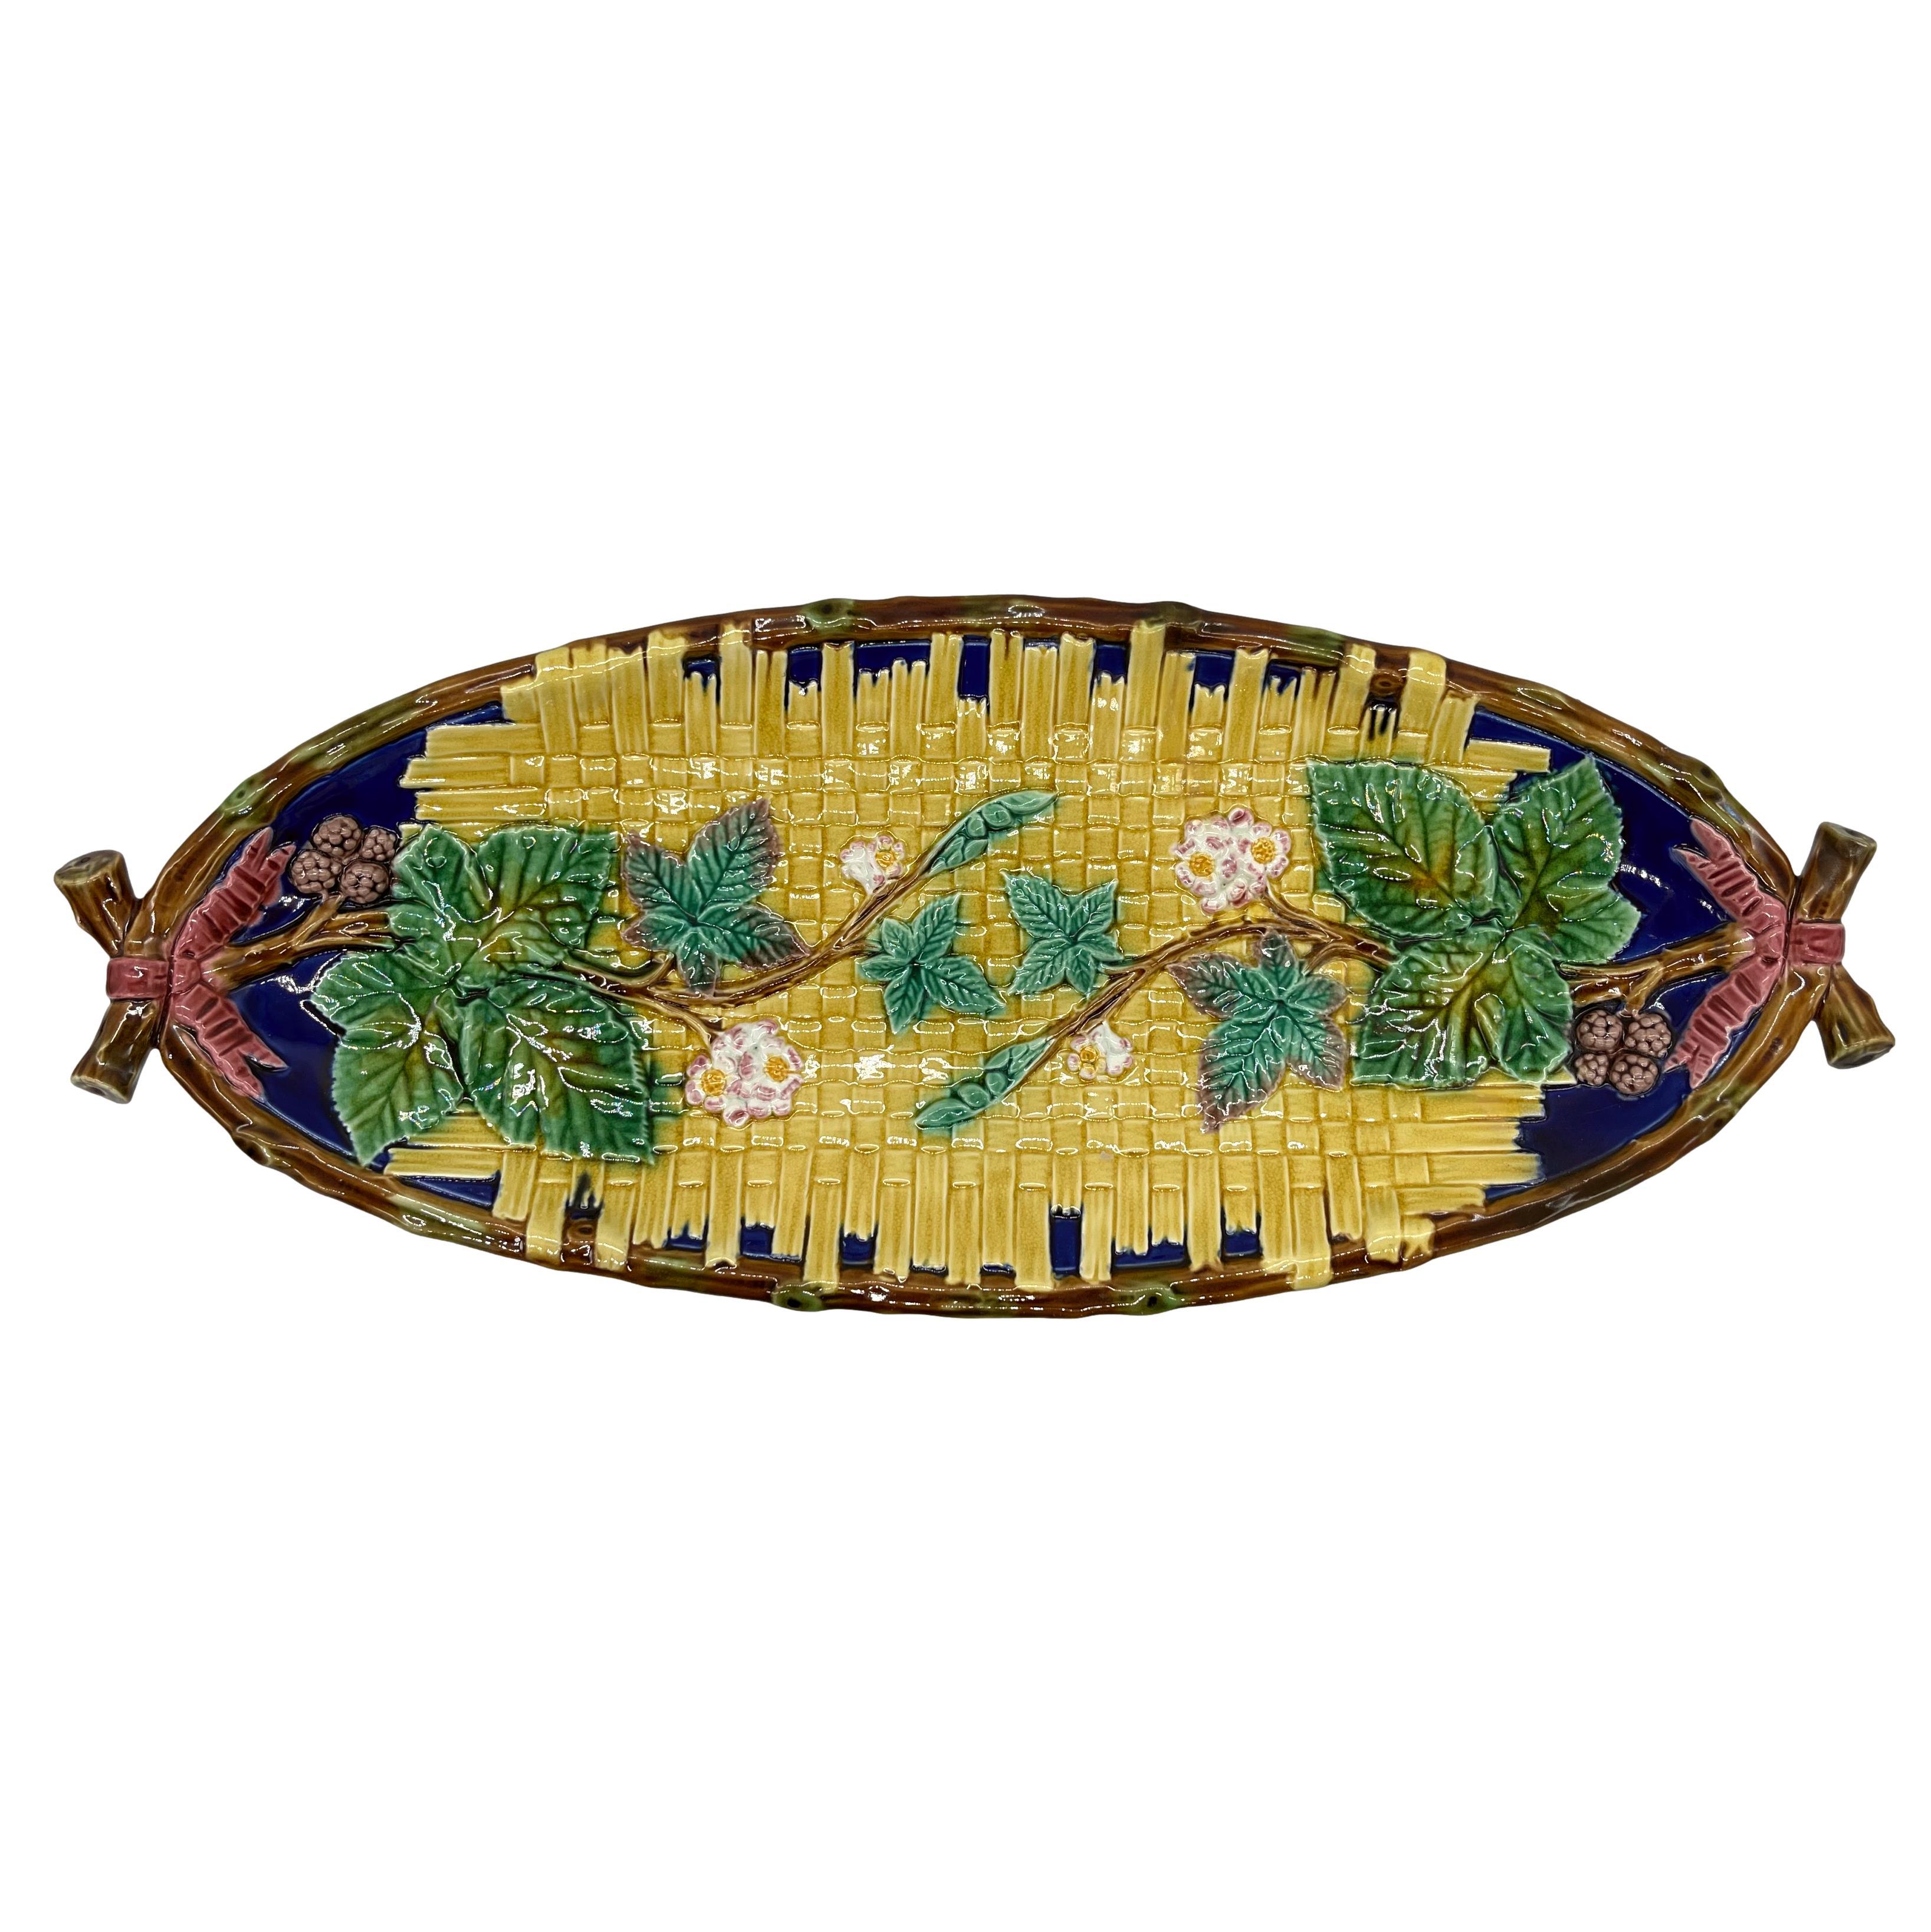 T.C. Brown-Westhead, Moore & Co. Majolica Oblong Tray, molded with a yellow glazed wicker mat with relief molded blackberries, trailing leaves, and blossoms on a cobalt blue ground, the branch form rim crossed and tied at either end with a pink and